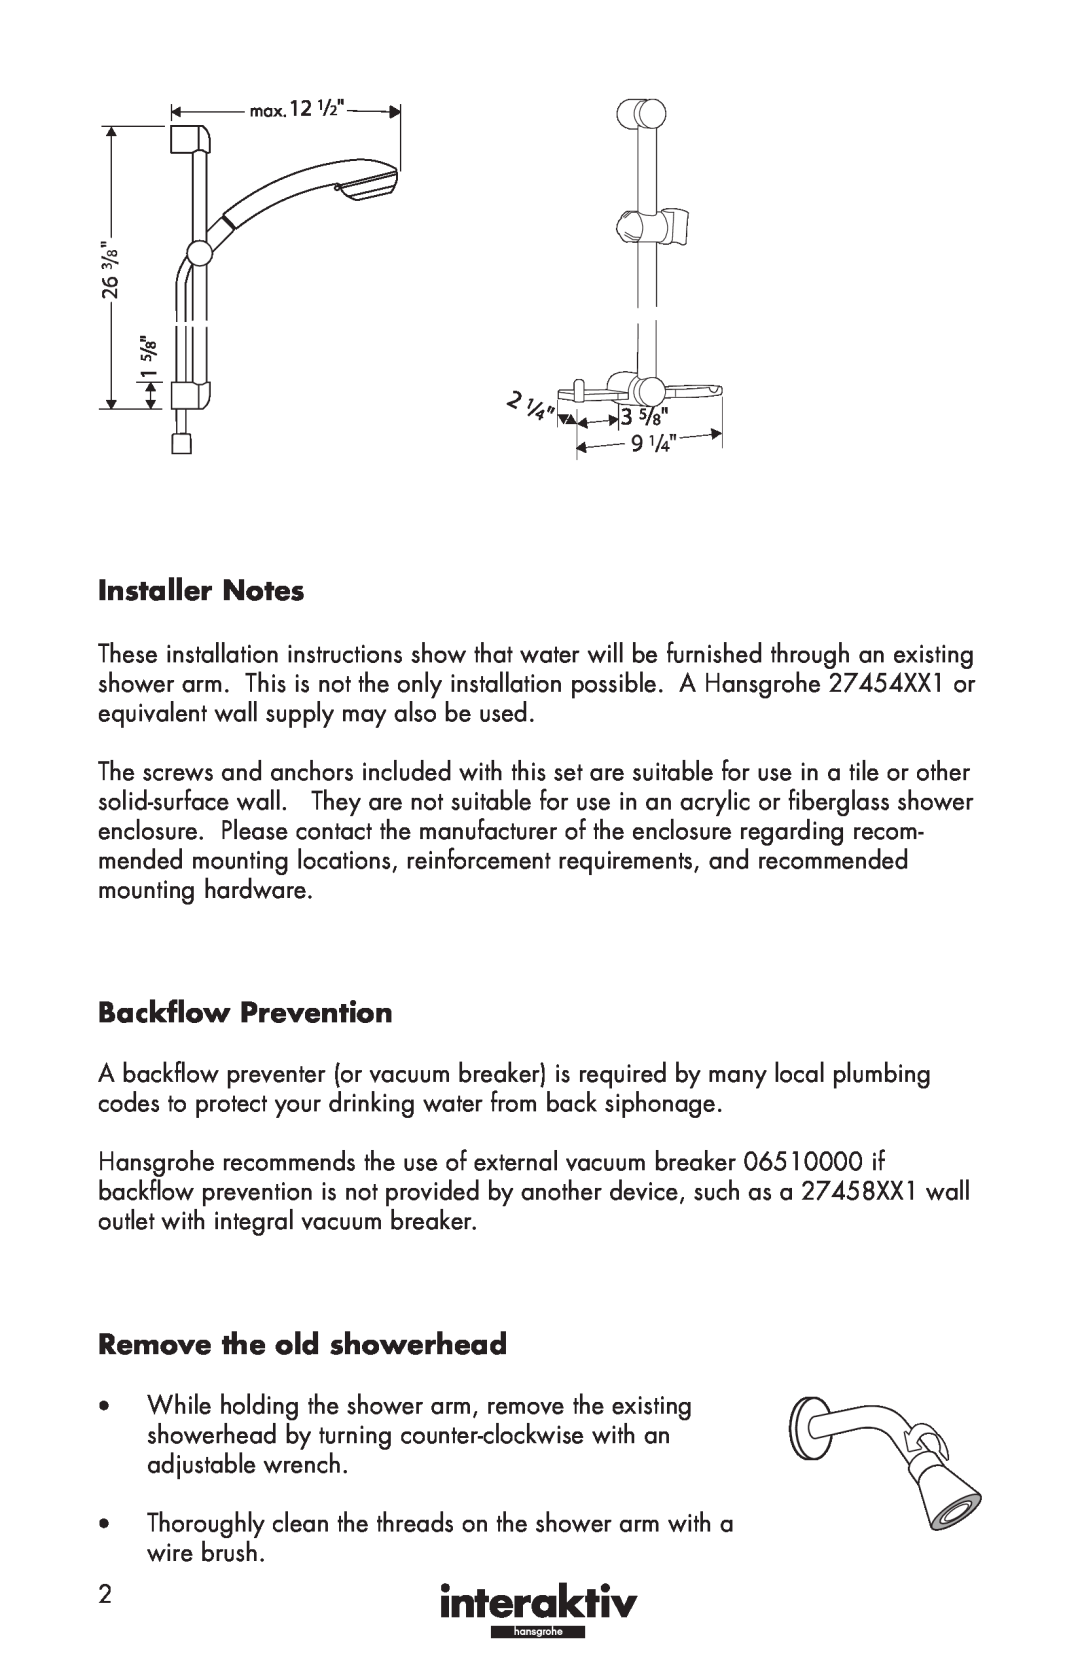 Hans Grohe 06888XX0, 06890XX0 installation instructions Installer Notes, Backflow Prevention, Remove the old showerhead 